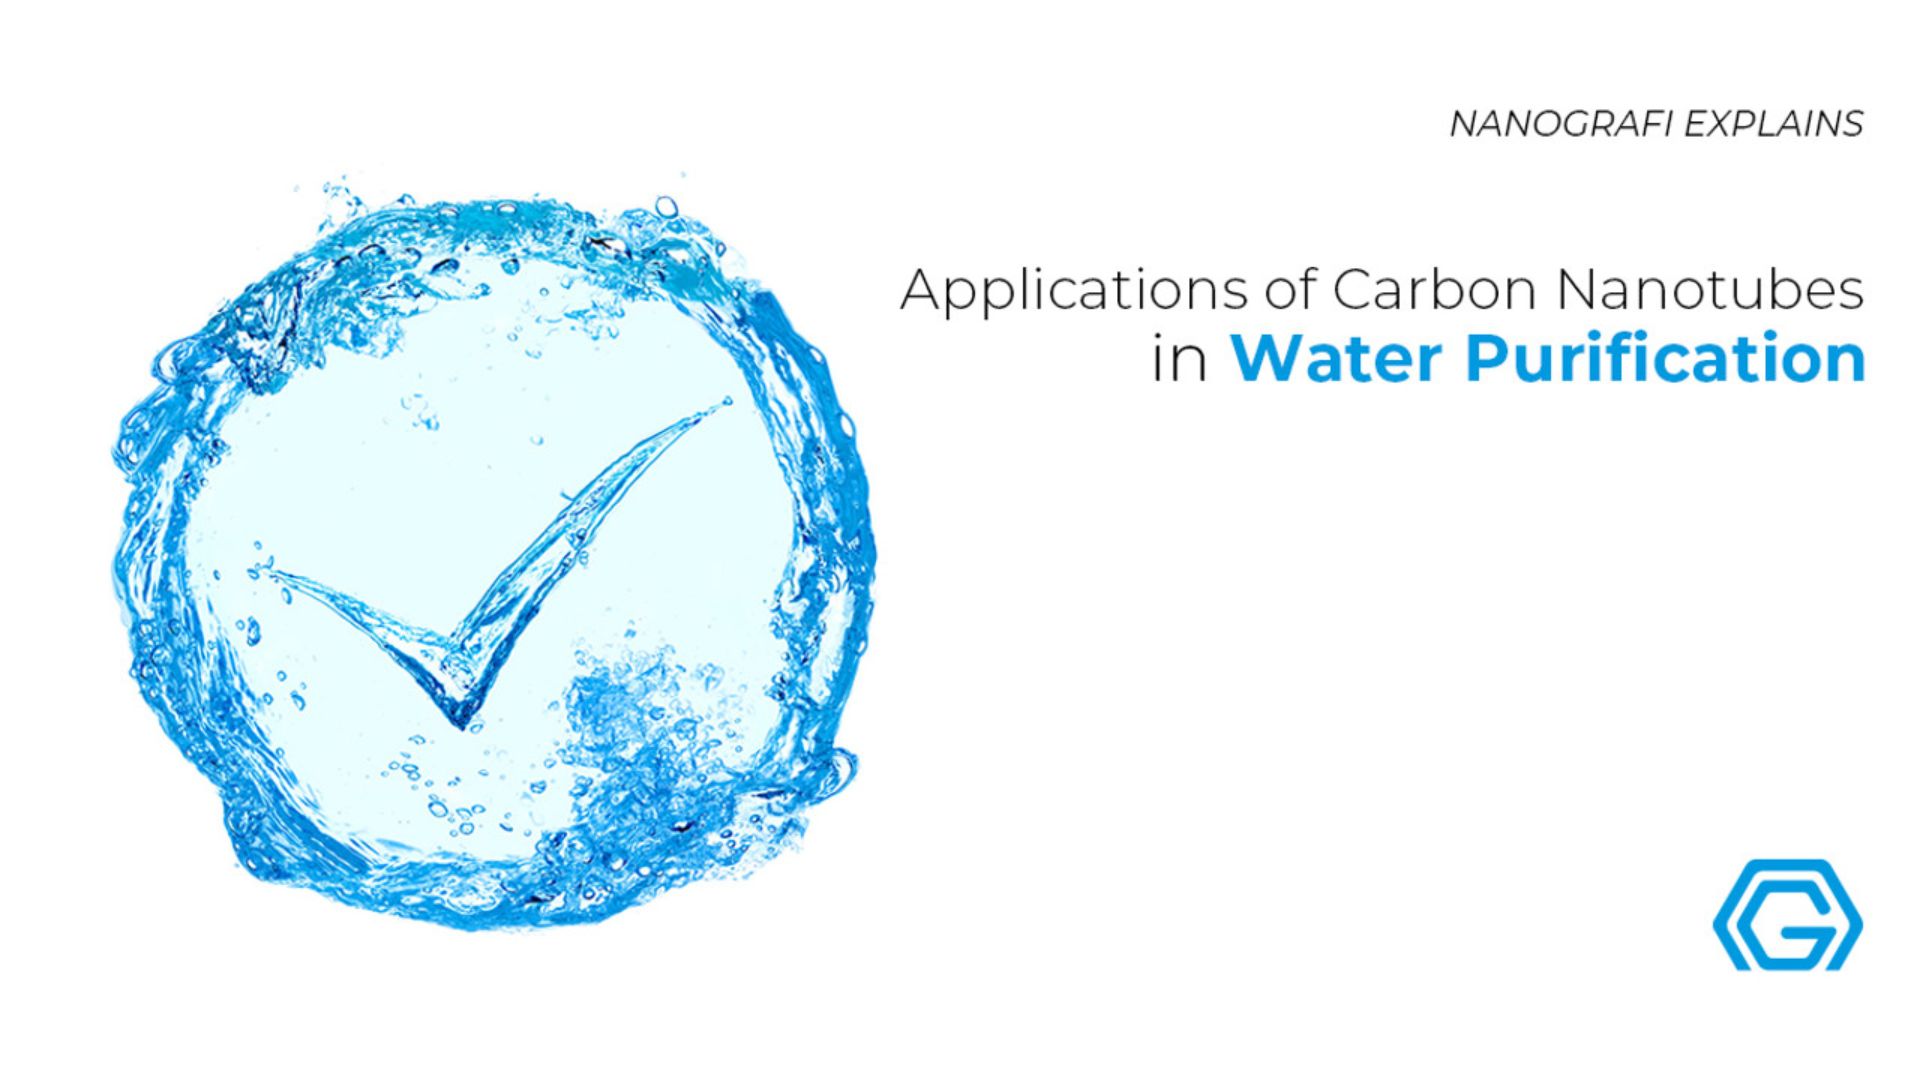 Applications of carbon nanotubes in water purification